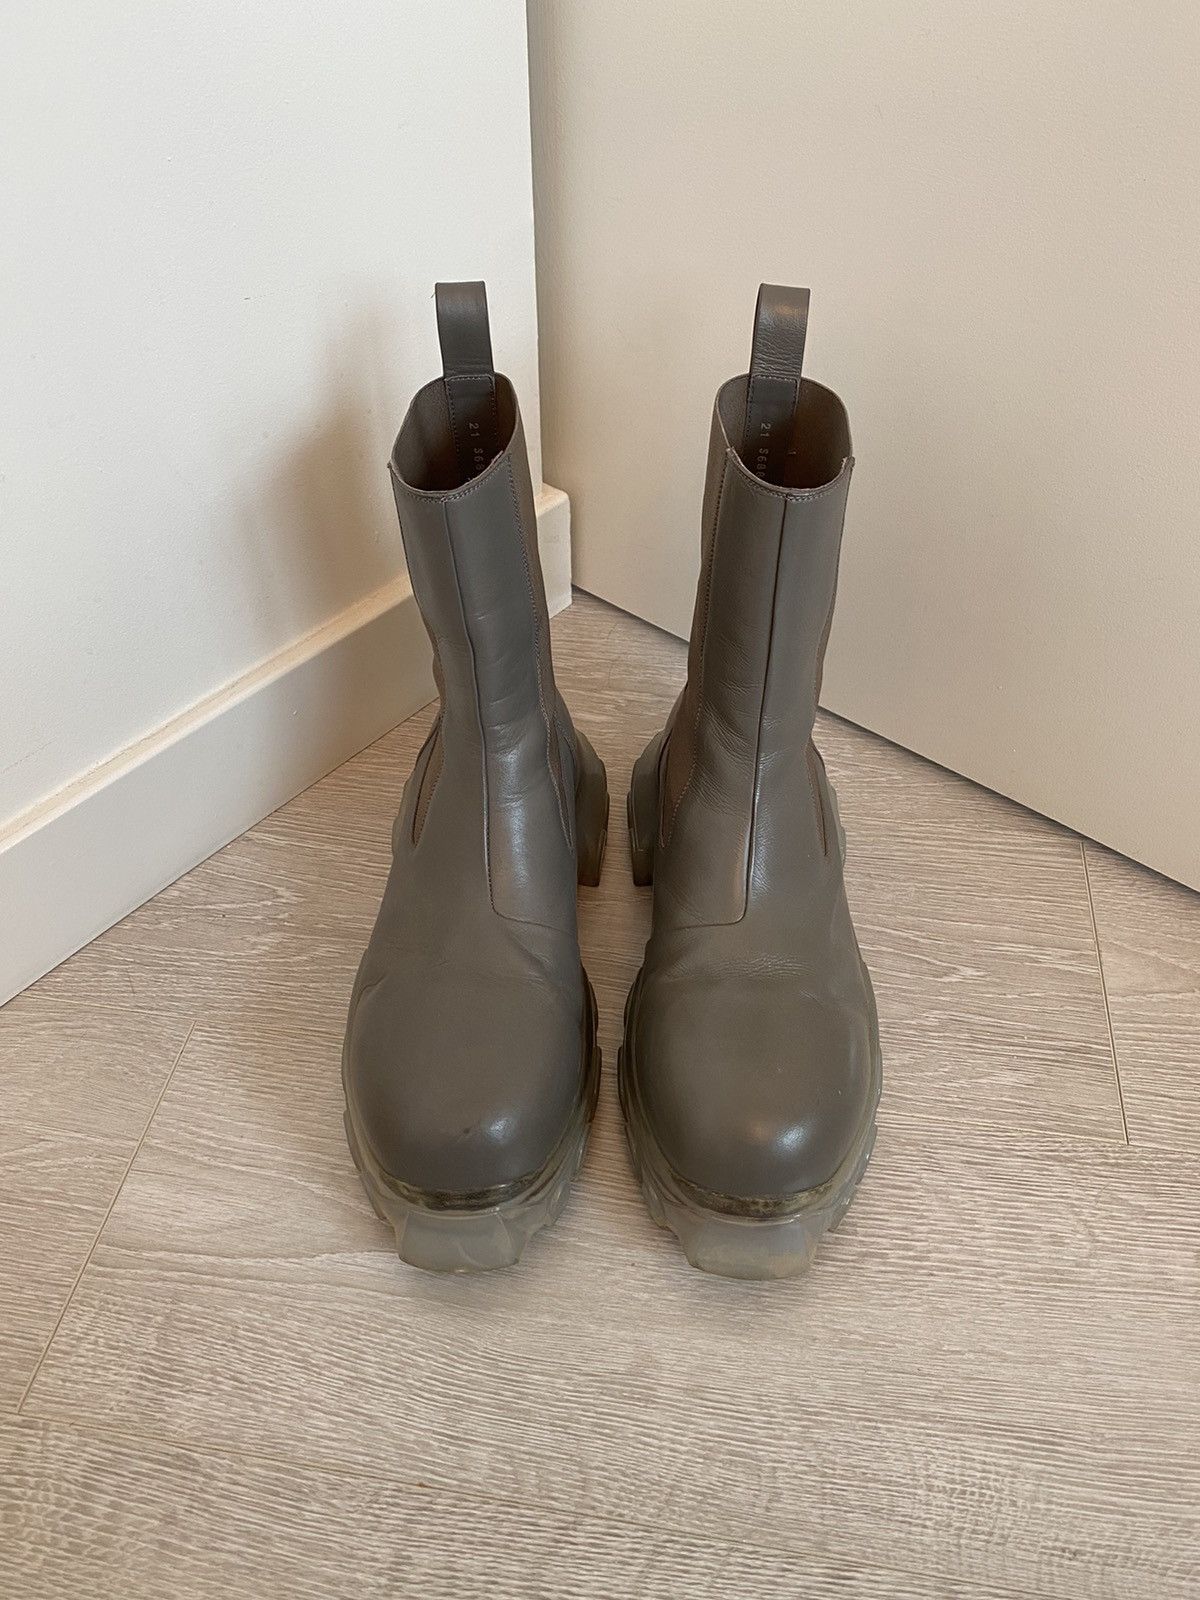 Rick Owens Bozo Beetle Tractor Boots | Grailed